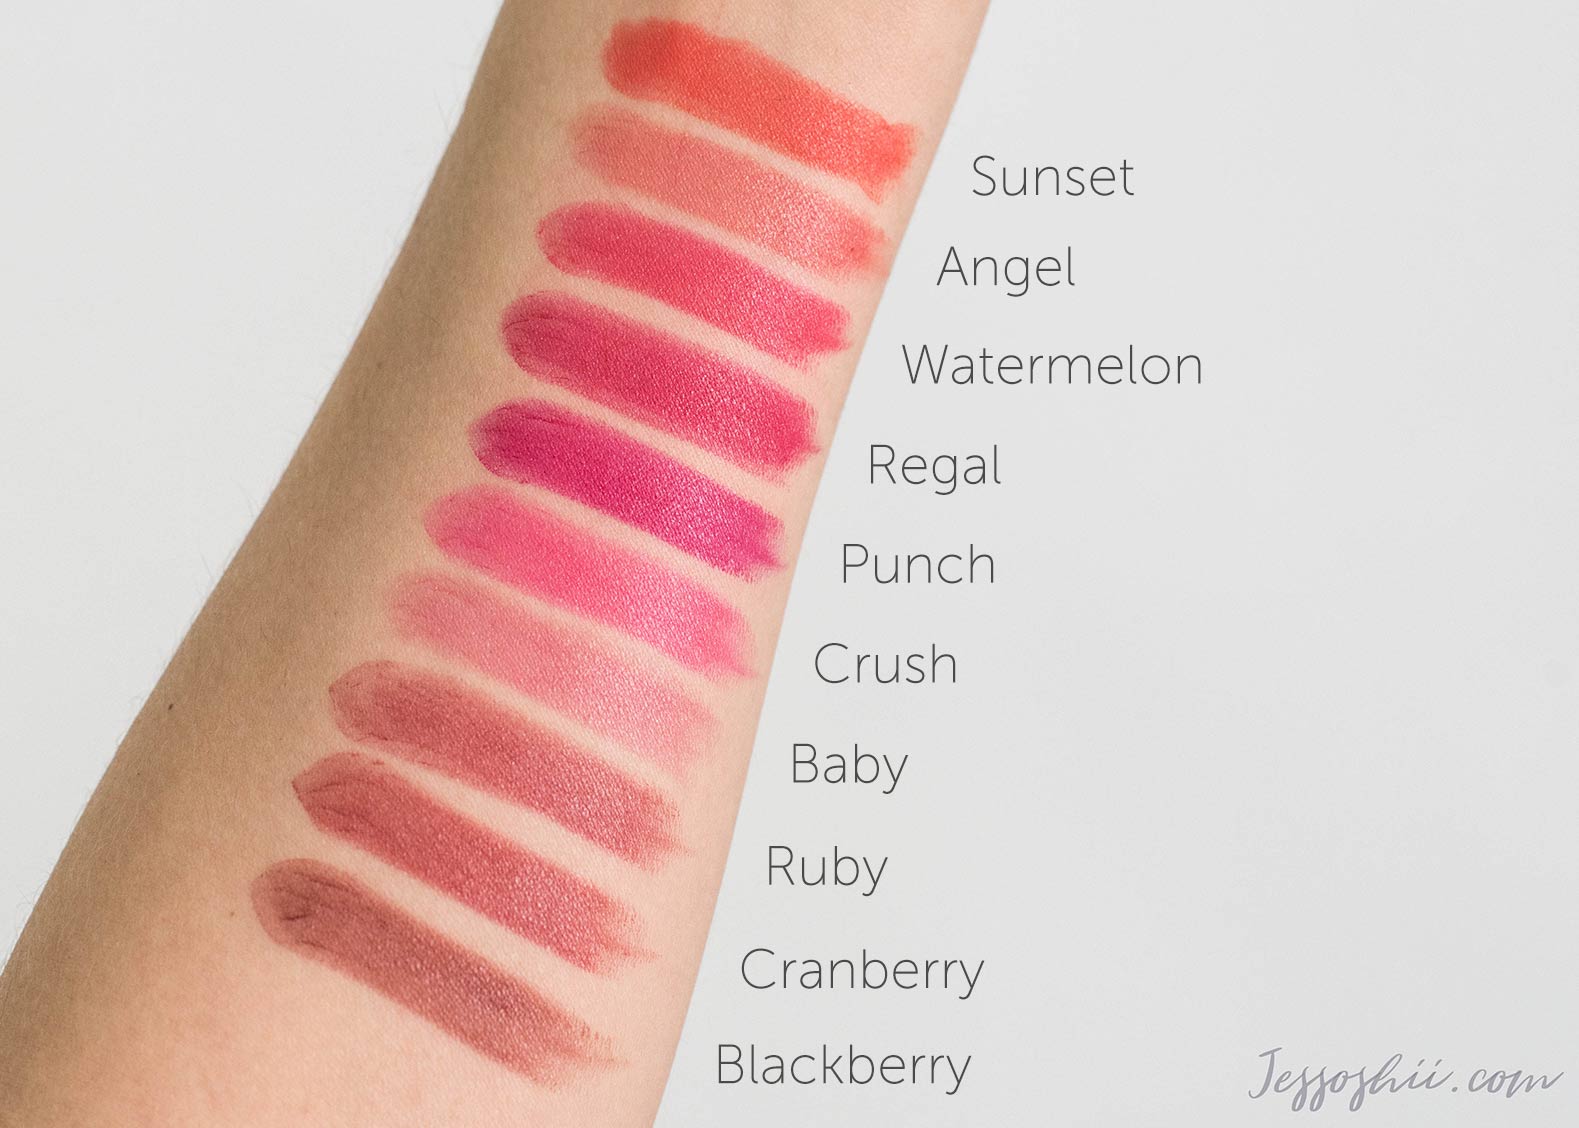 REVIEW: Bobbi Brown Crushed Lip Colors + Swatches - Jessoshii